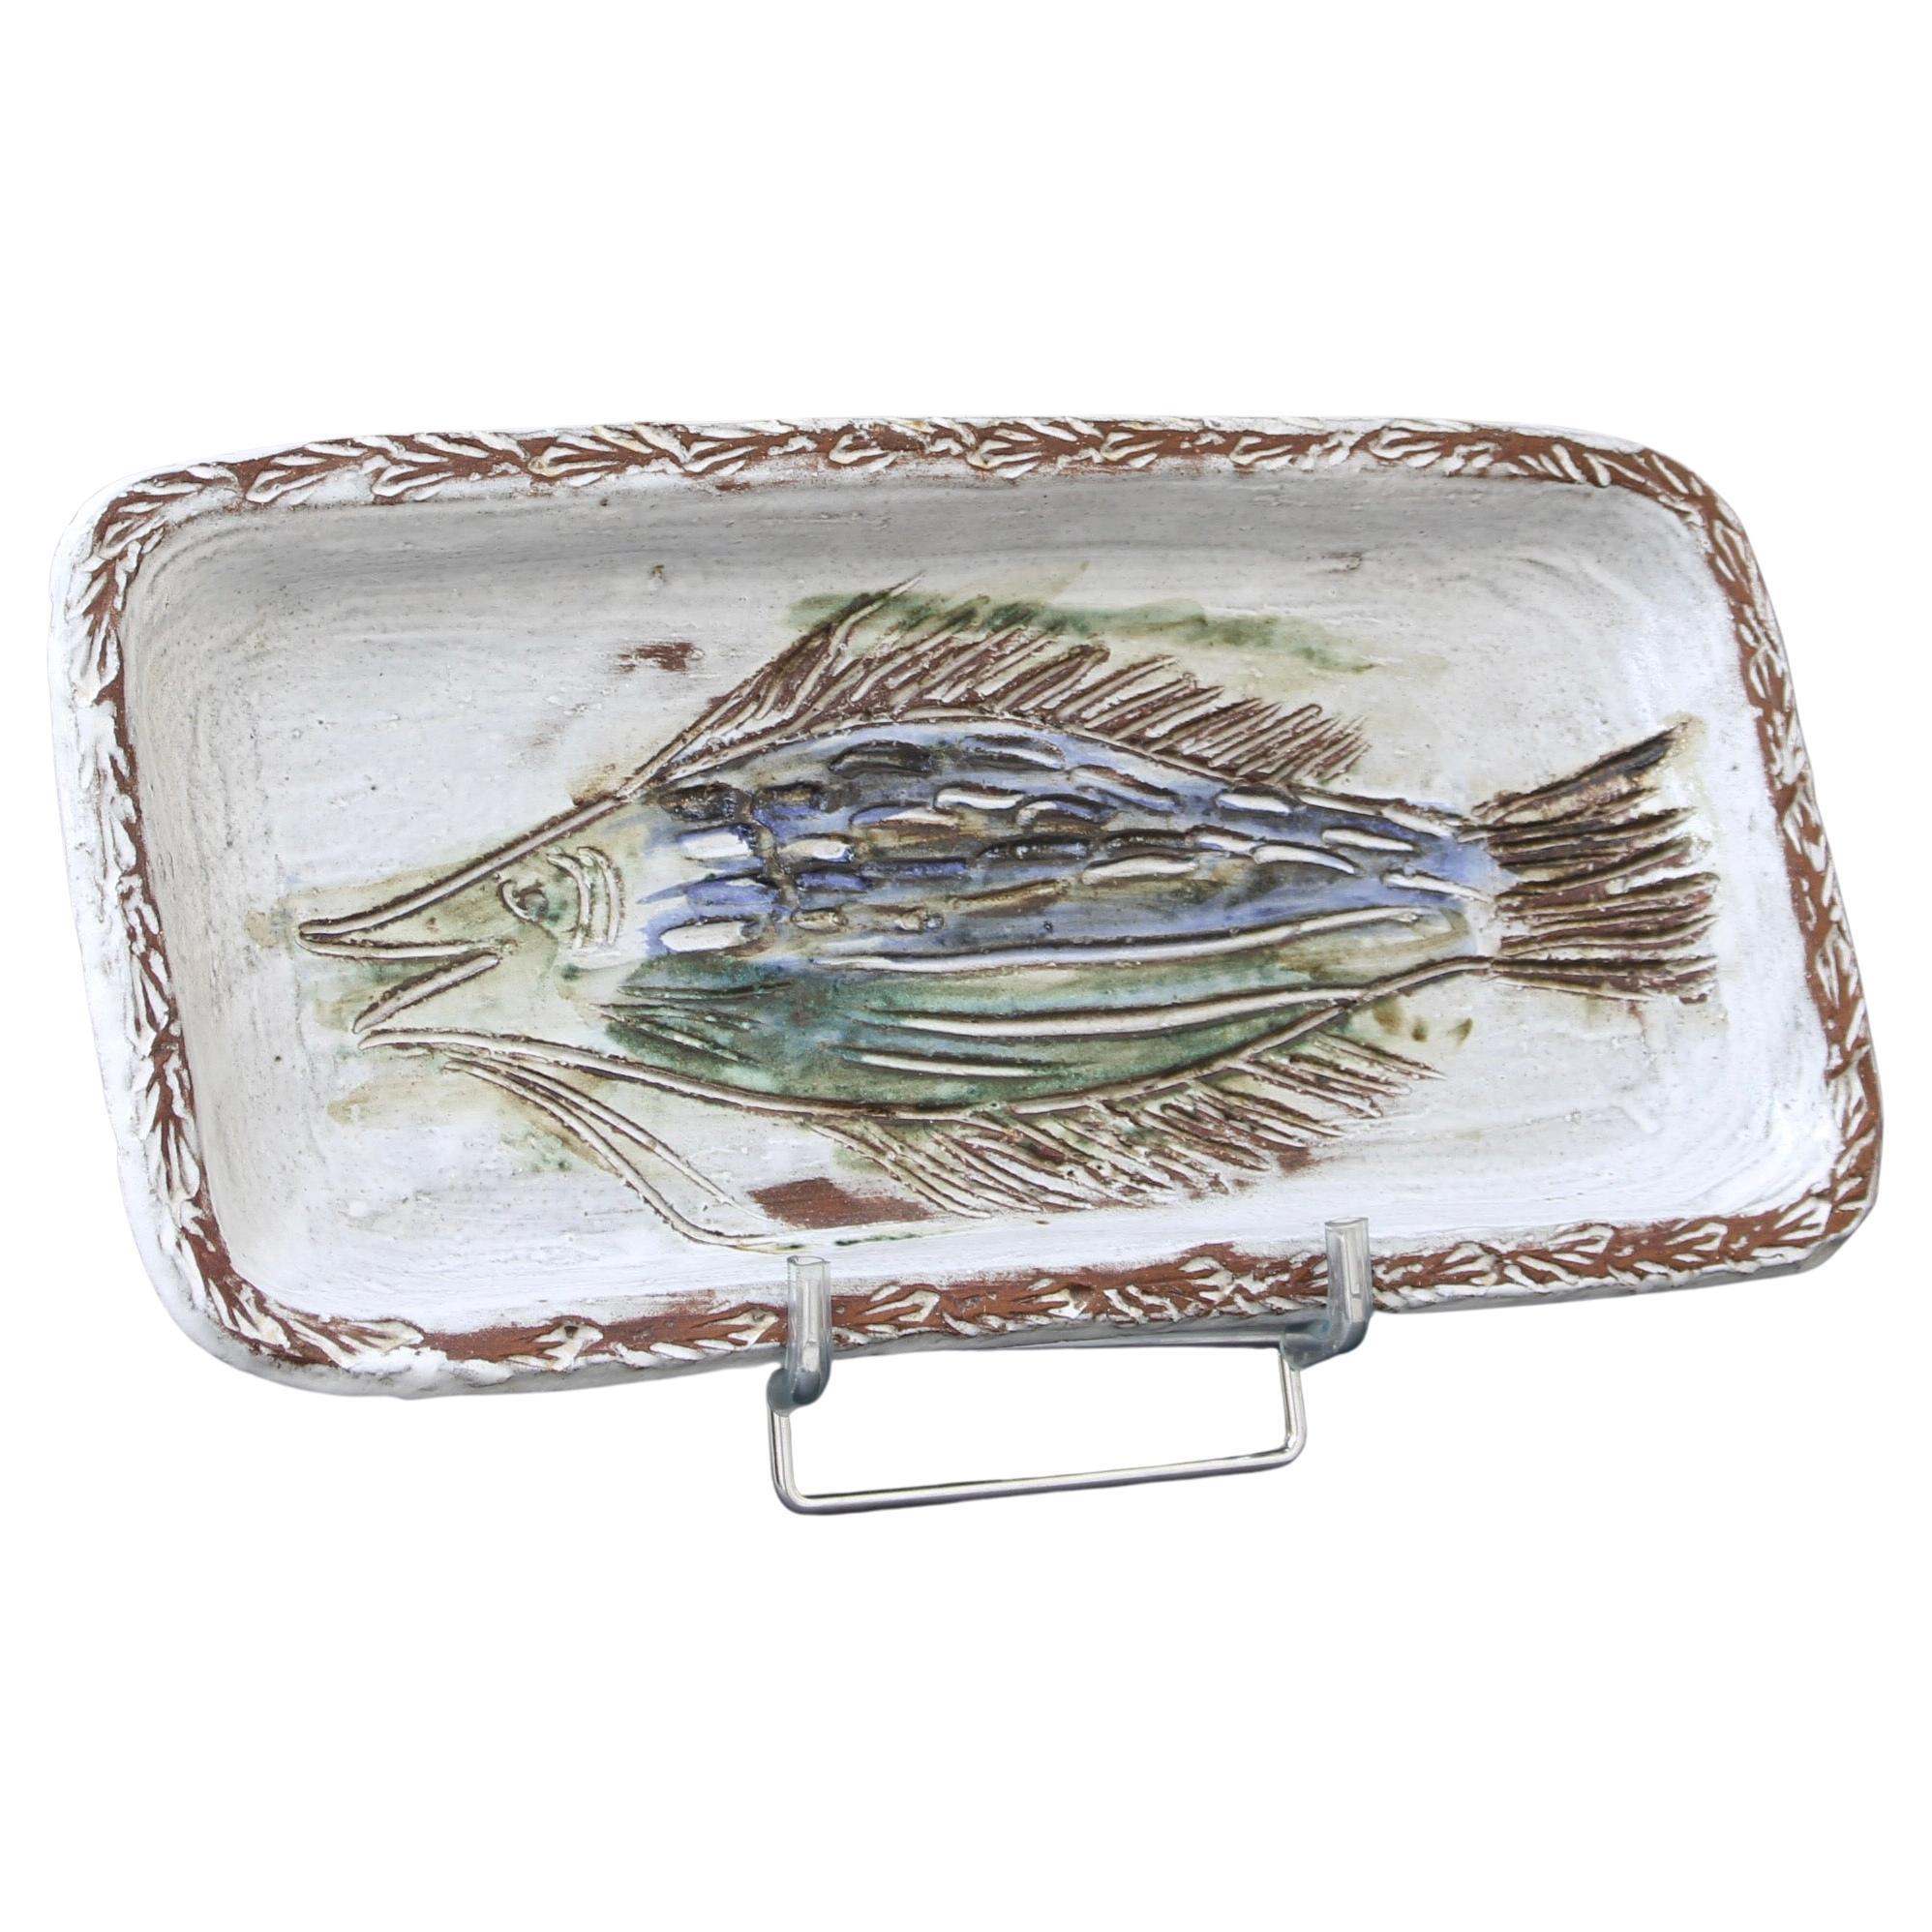 French ceramic decorative dish with fish motif (circa 1970s) by Albert Thiry. A rectangular-shaped ceramic dish has rounded edges with a chalk-white glaze surface. Within the dish's recess a fish is incised into the glaze and painted in Thiry's